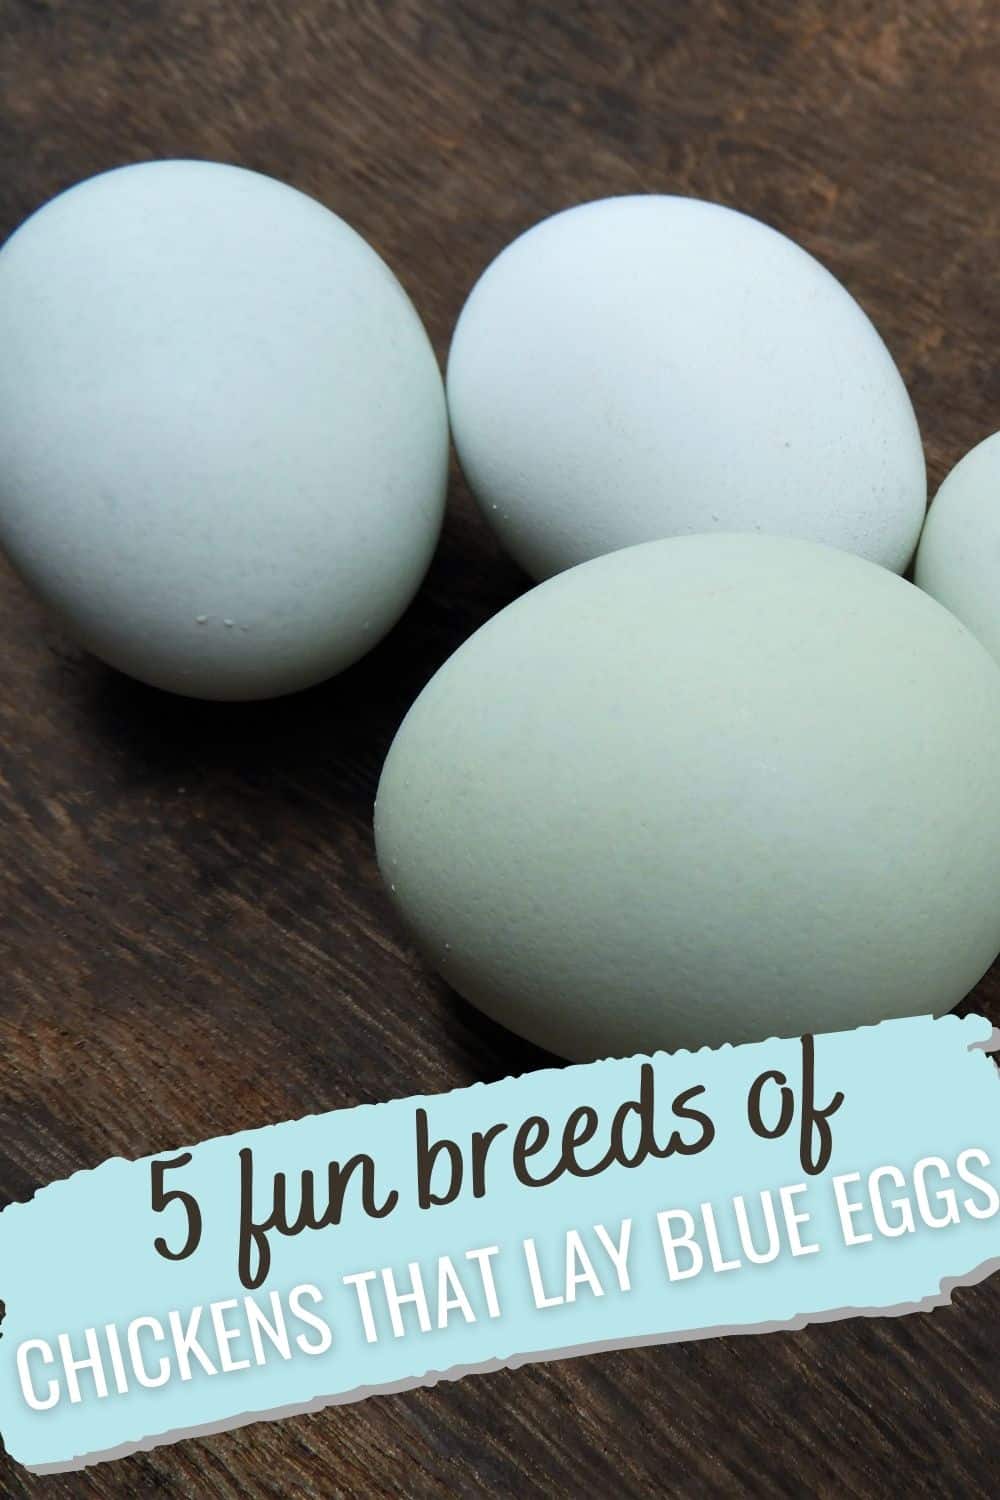 5 fun breeds of chickens that lay blue eggs